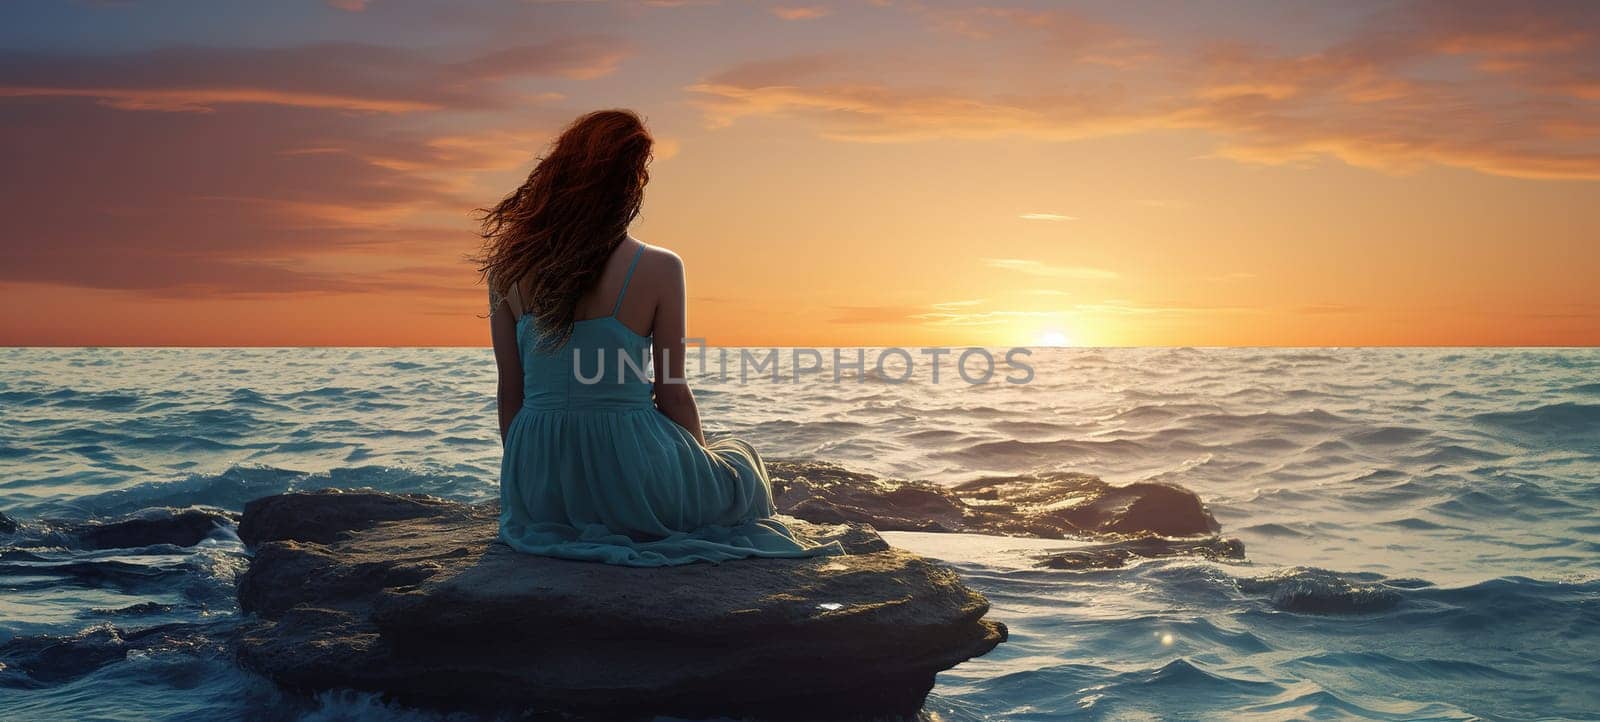 woman in a blue dress sits thoughtfully,alone on a rock by the sea and enjoys the fiery sunset over the horizon by KaterinaDalemans